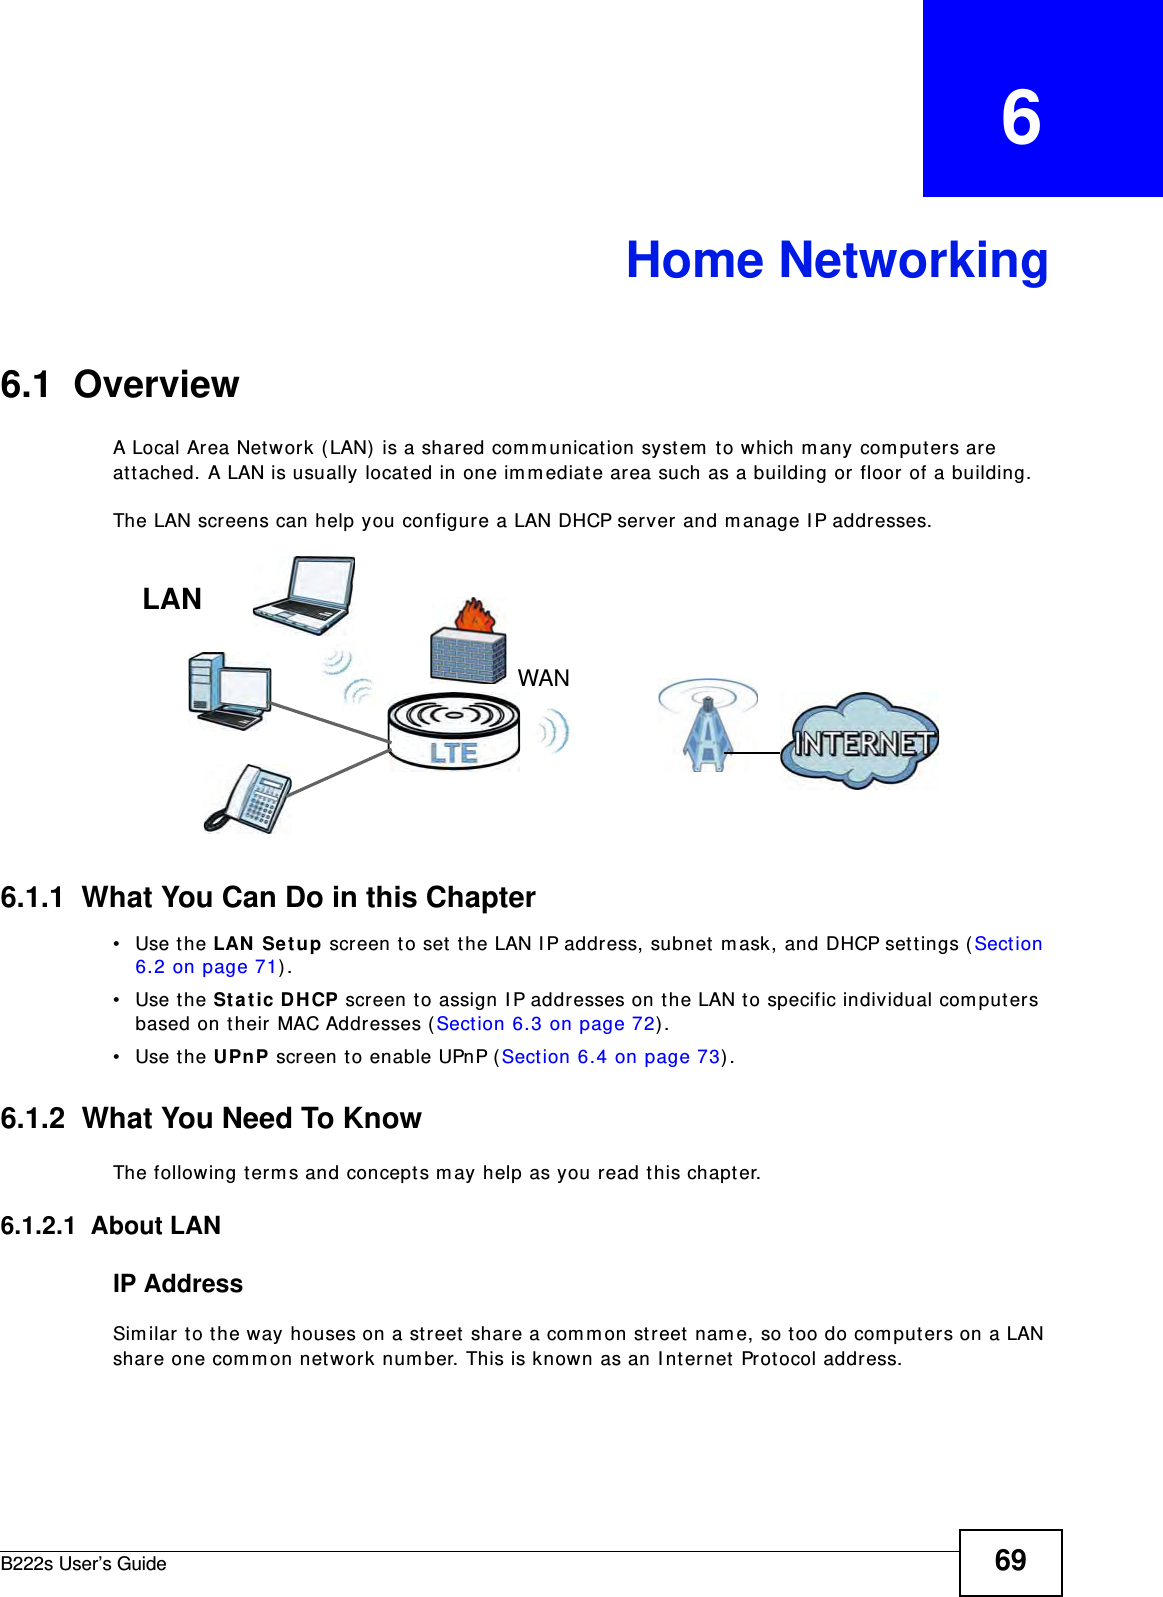 B222s User’s Guide 69CHAPTER   6Home Networking6.1  Overview  A Local Ar ea Network ( LAN)  is a shar ed com m unication system  t o which m any  com puters are att ached. A LAN is usually located in one im m ediat e area such as a building or floor of a building.The LAN screens can help you configure a LAN DHCP server and m anage I P addresses.6.1.1  What You Can Do in this Chapter• Use the LAN  Set up screen t o set t he LAN I P address, subnet  m ask, and DHCP sett ings ( Sect ion 6.2 on page 71) . • Use the St a t ic DH CP screen to assign I P addresses on t he LAN to specific individual com put ers based on their MAC Addresses ( Sect ion 6.3 on page 72) .• Use the UPnP screen t o enable UPnP ( Sect ion 6.4 on page 73) .6.1.2  What You Need To KnowThe following term s and concept s m ay help as you read this chapt er.6.1.2.1  About LANIP AddressSim ilar t o t he way houses on a street  shar e a com m on str eet  nam e, so t oo do com put ers on a LAN share one com m on net work num ber. This is know n as an I nternet  Prot ocol address.WANLAN